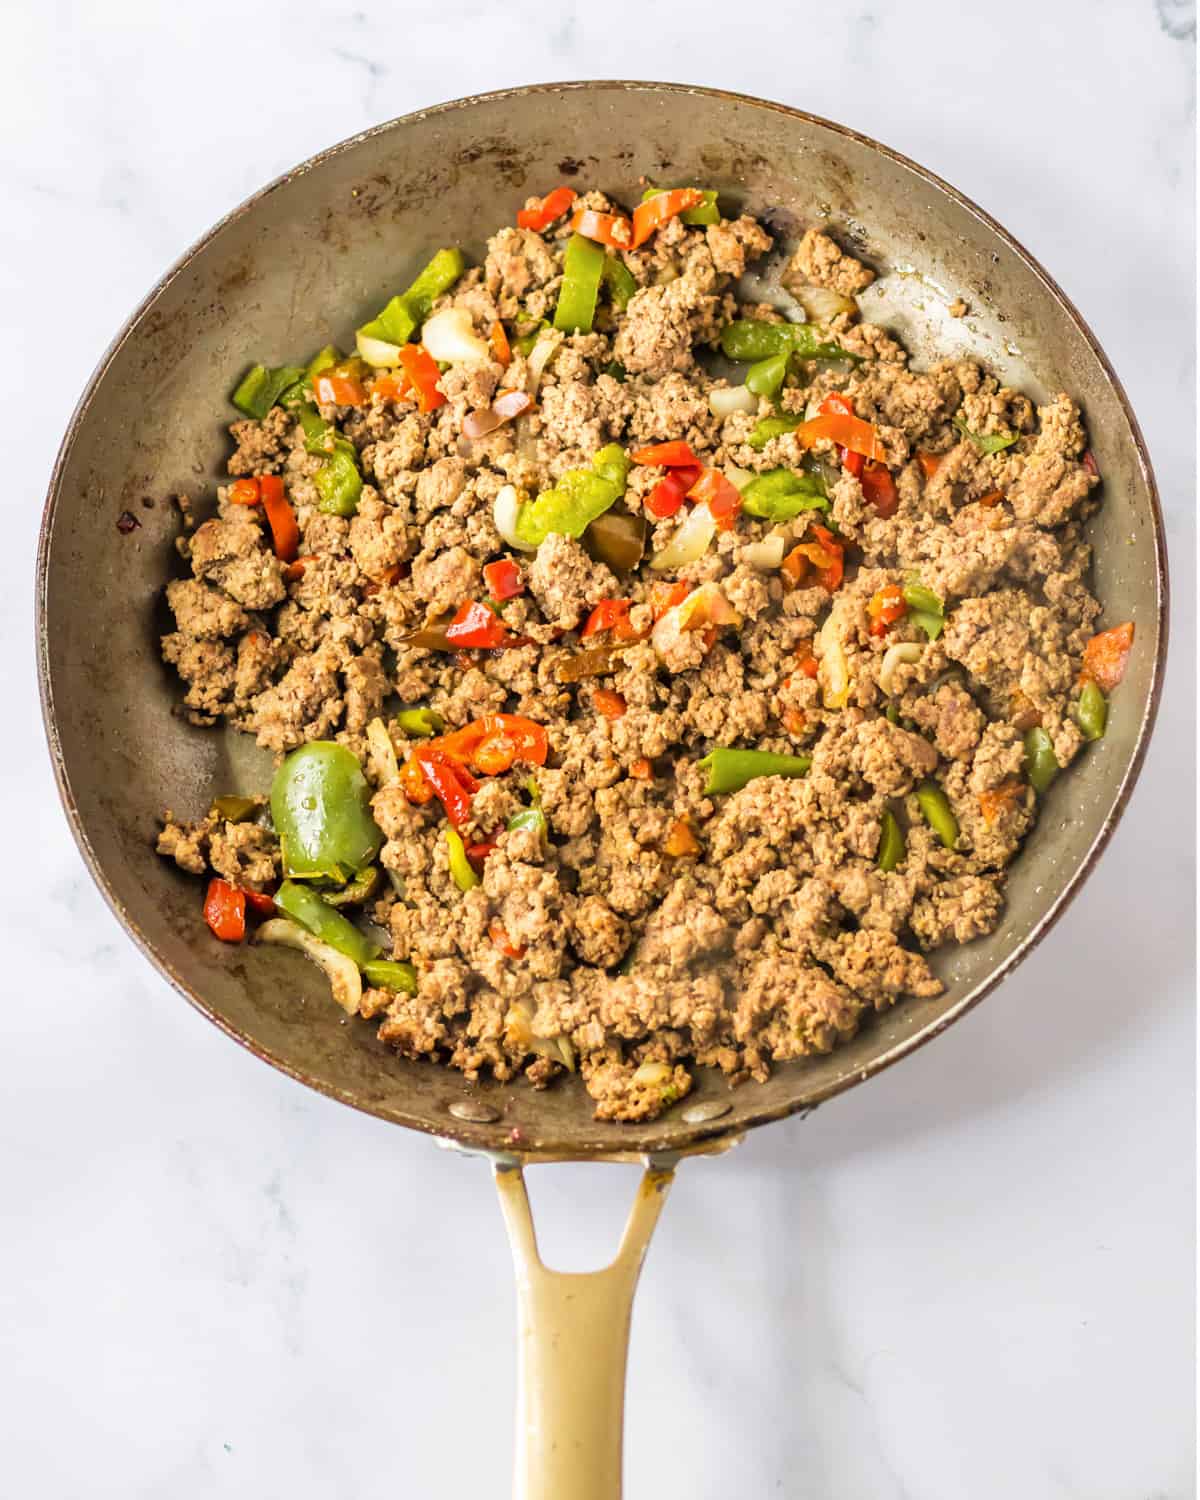 Browned ground beef, peppers, and onions in a frying pan.